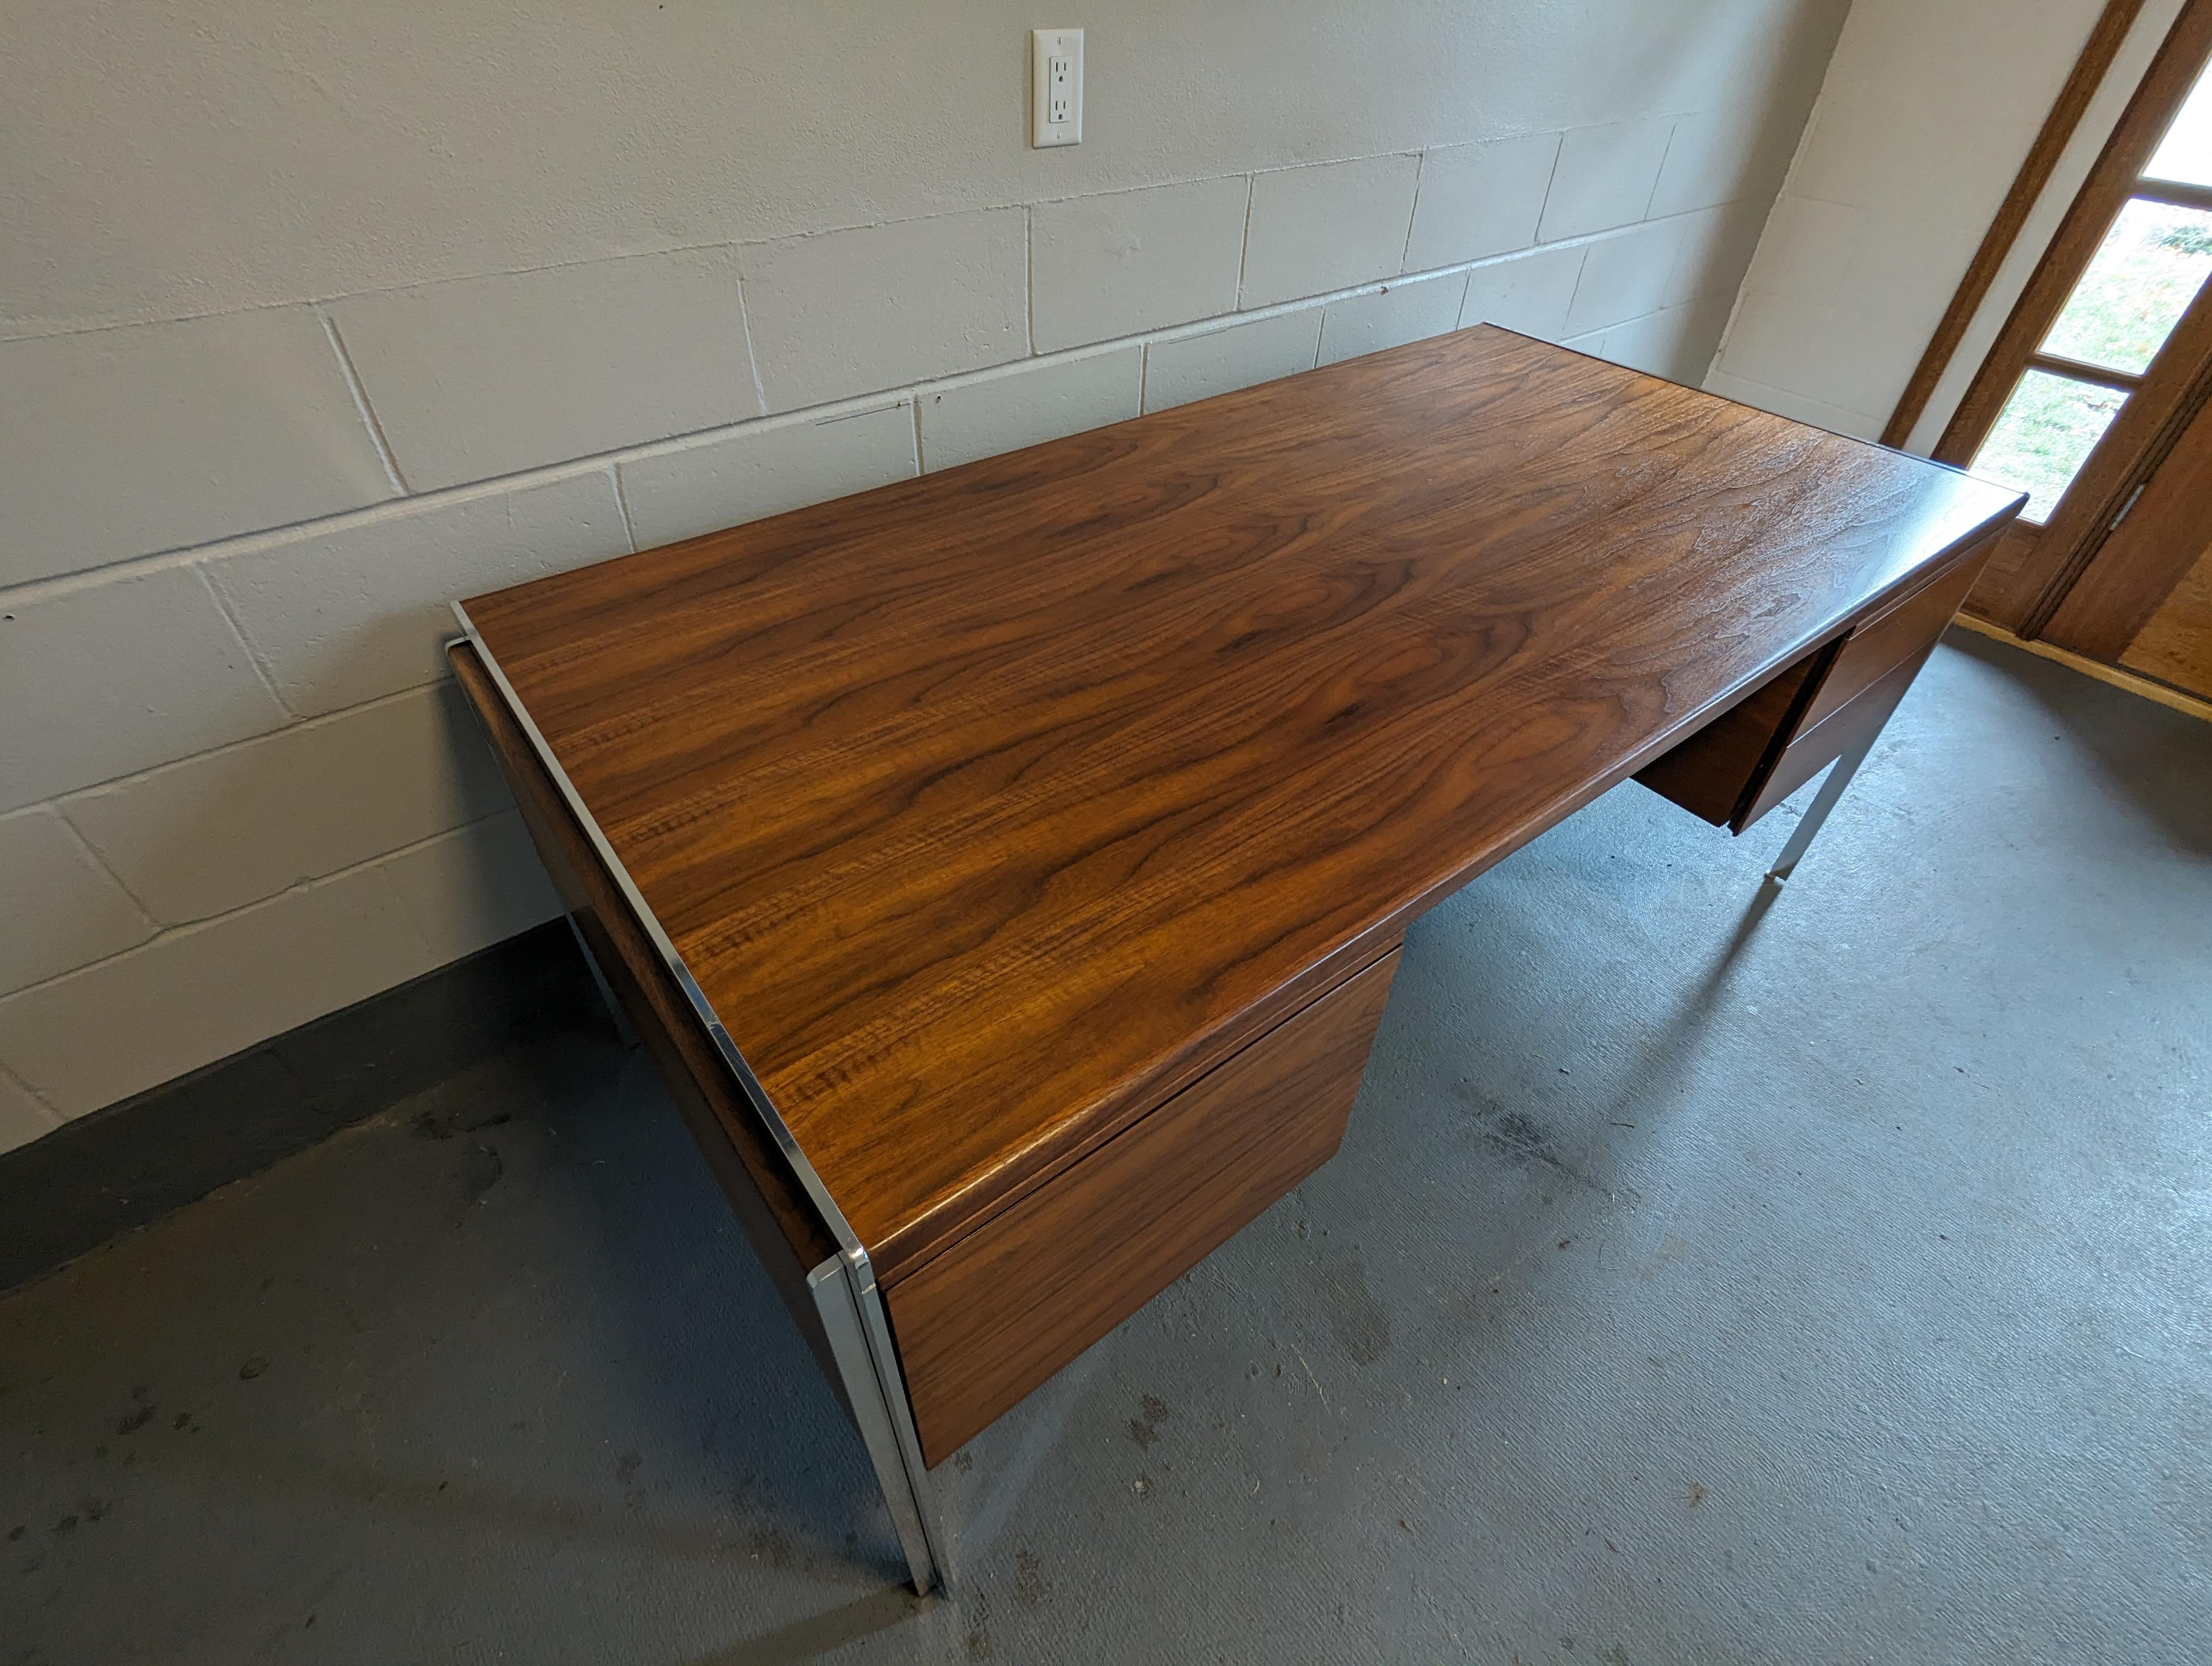 Walnut Executive Desk by Alexis Yermakov for Stow Davis In Good Condition For Sale In Cedar Falls, IA